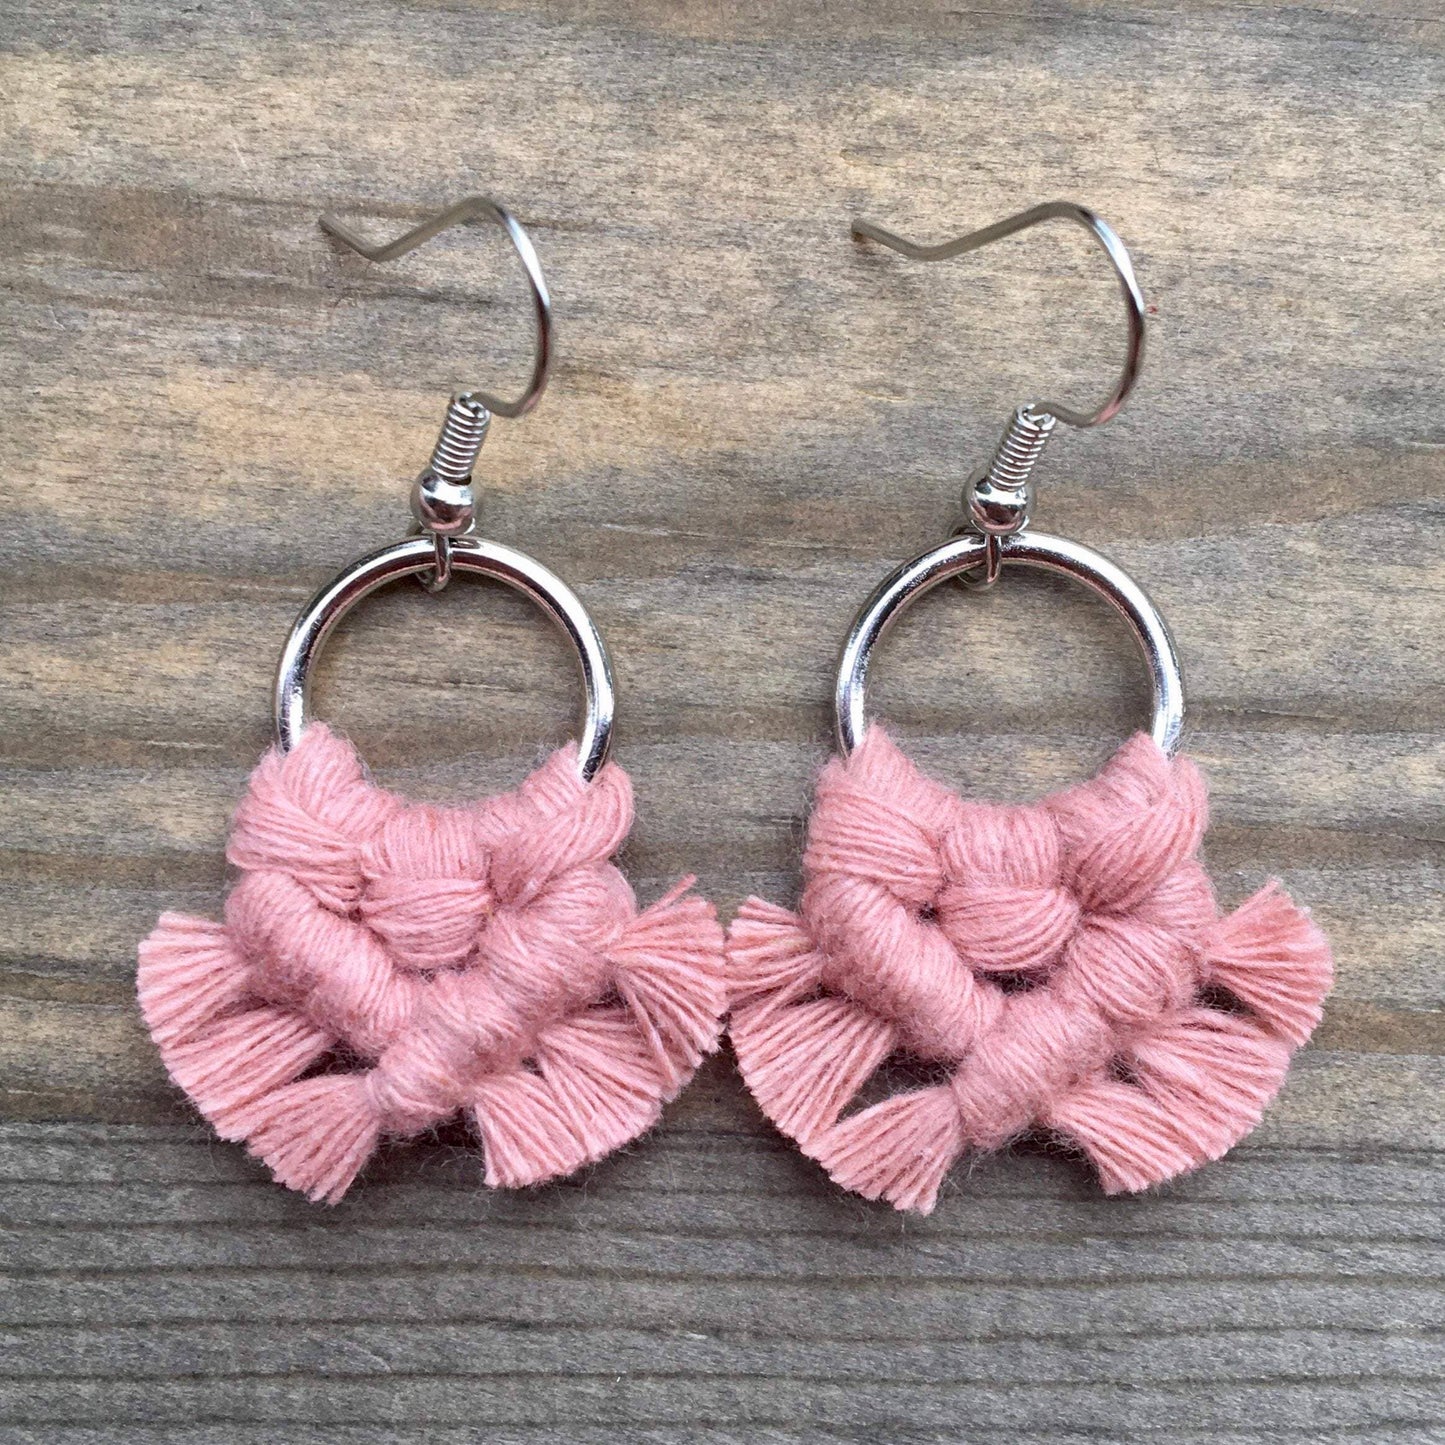 Micro Fringe Round Earrings - Blush Pink & Silver